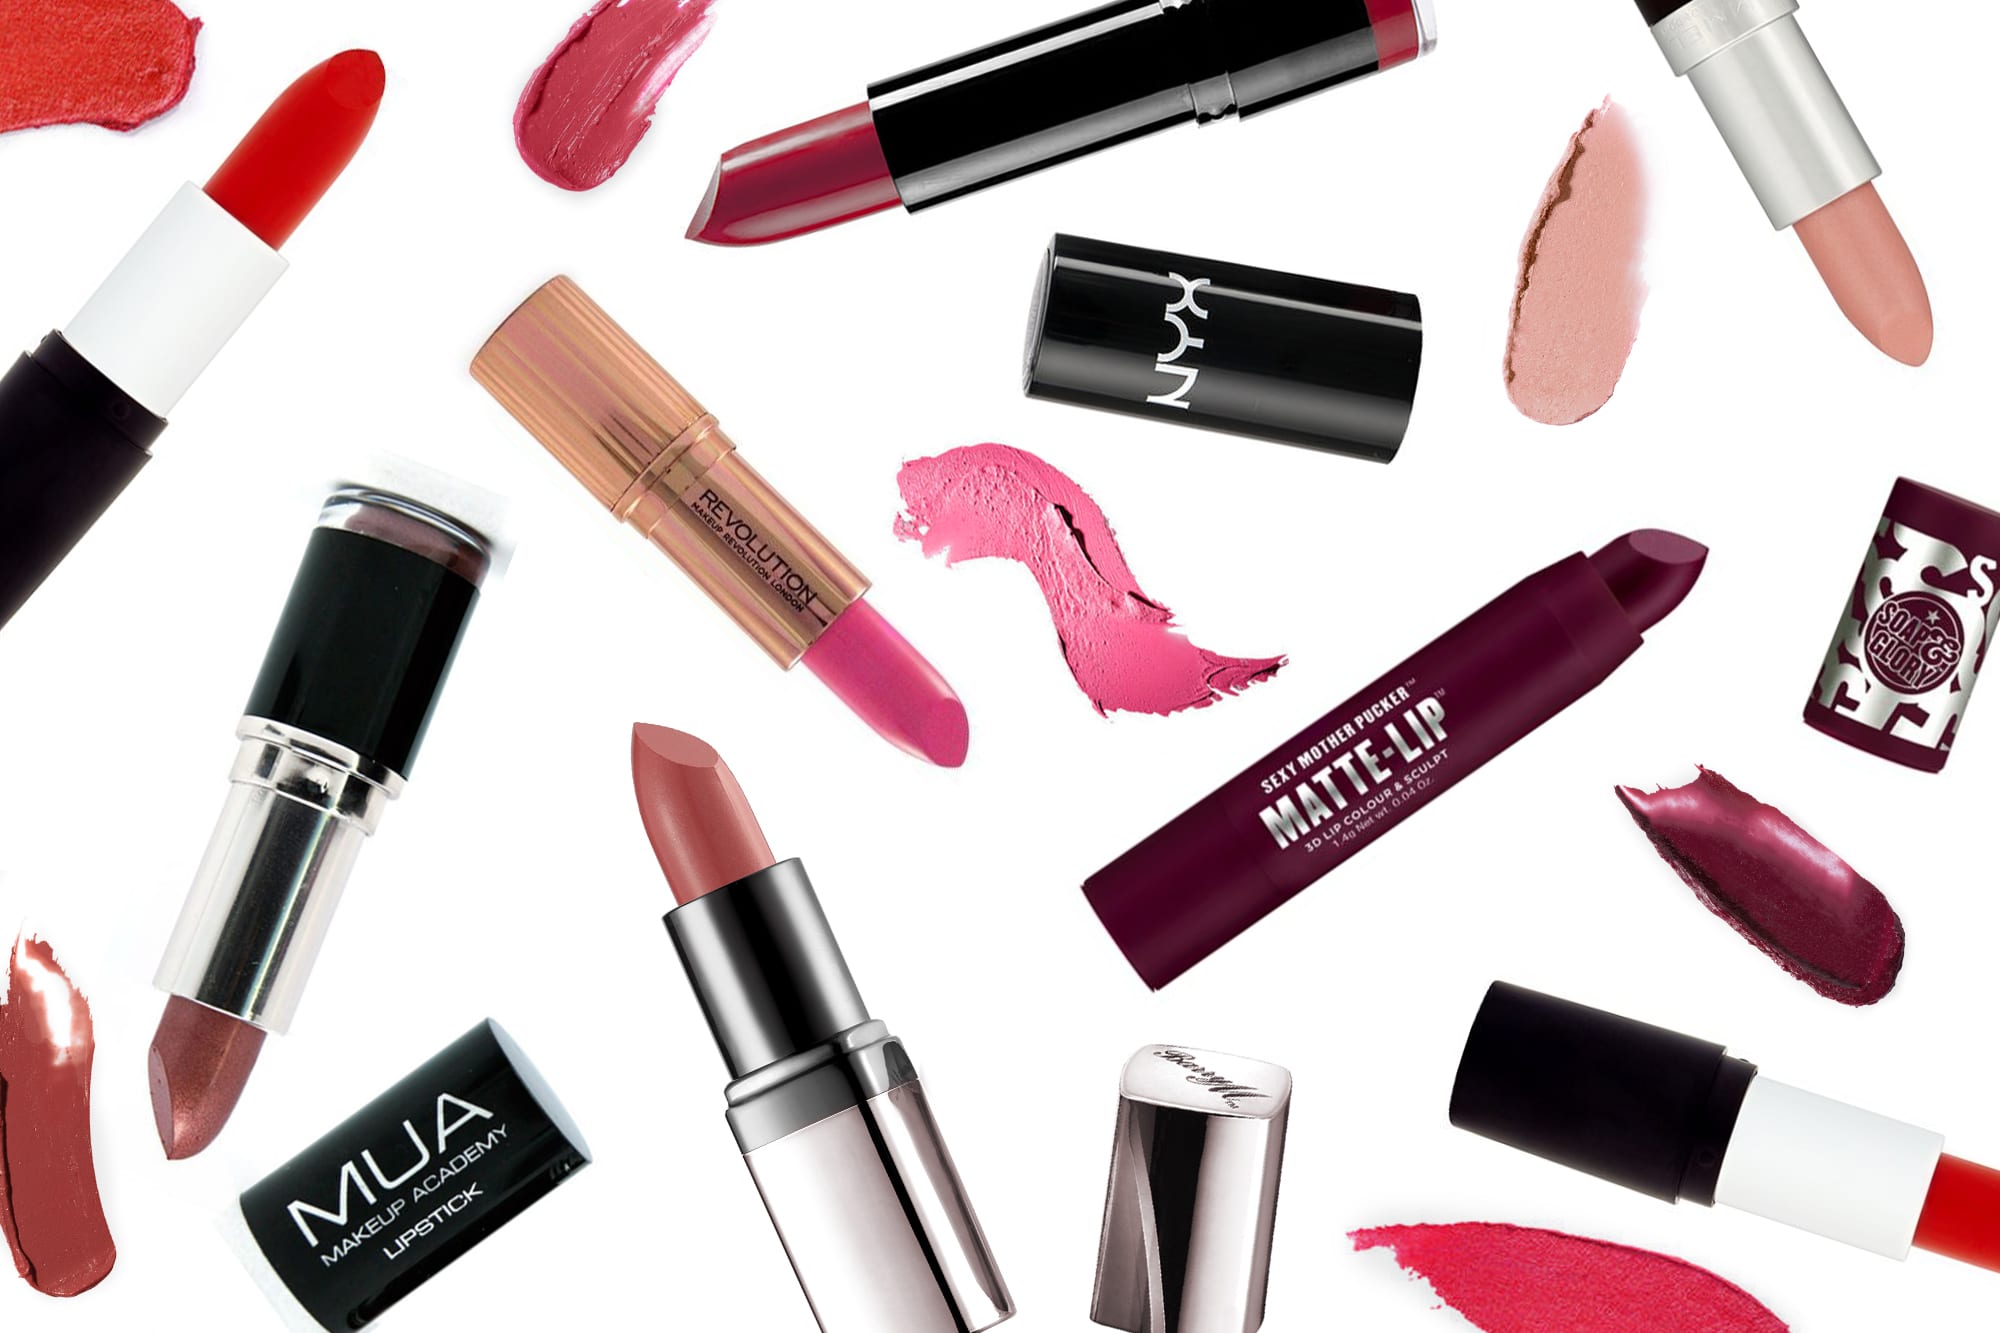 These Lipsticks Are All Under £5